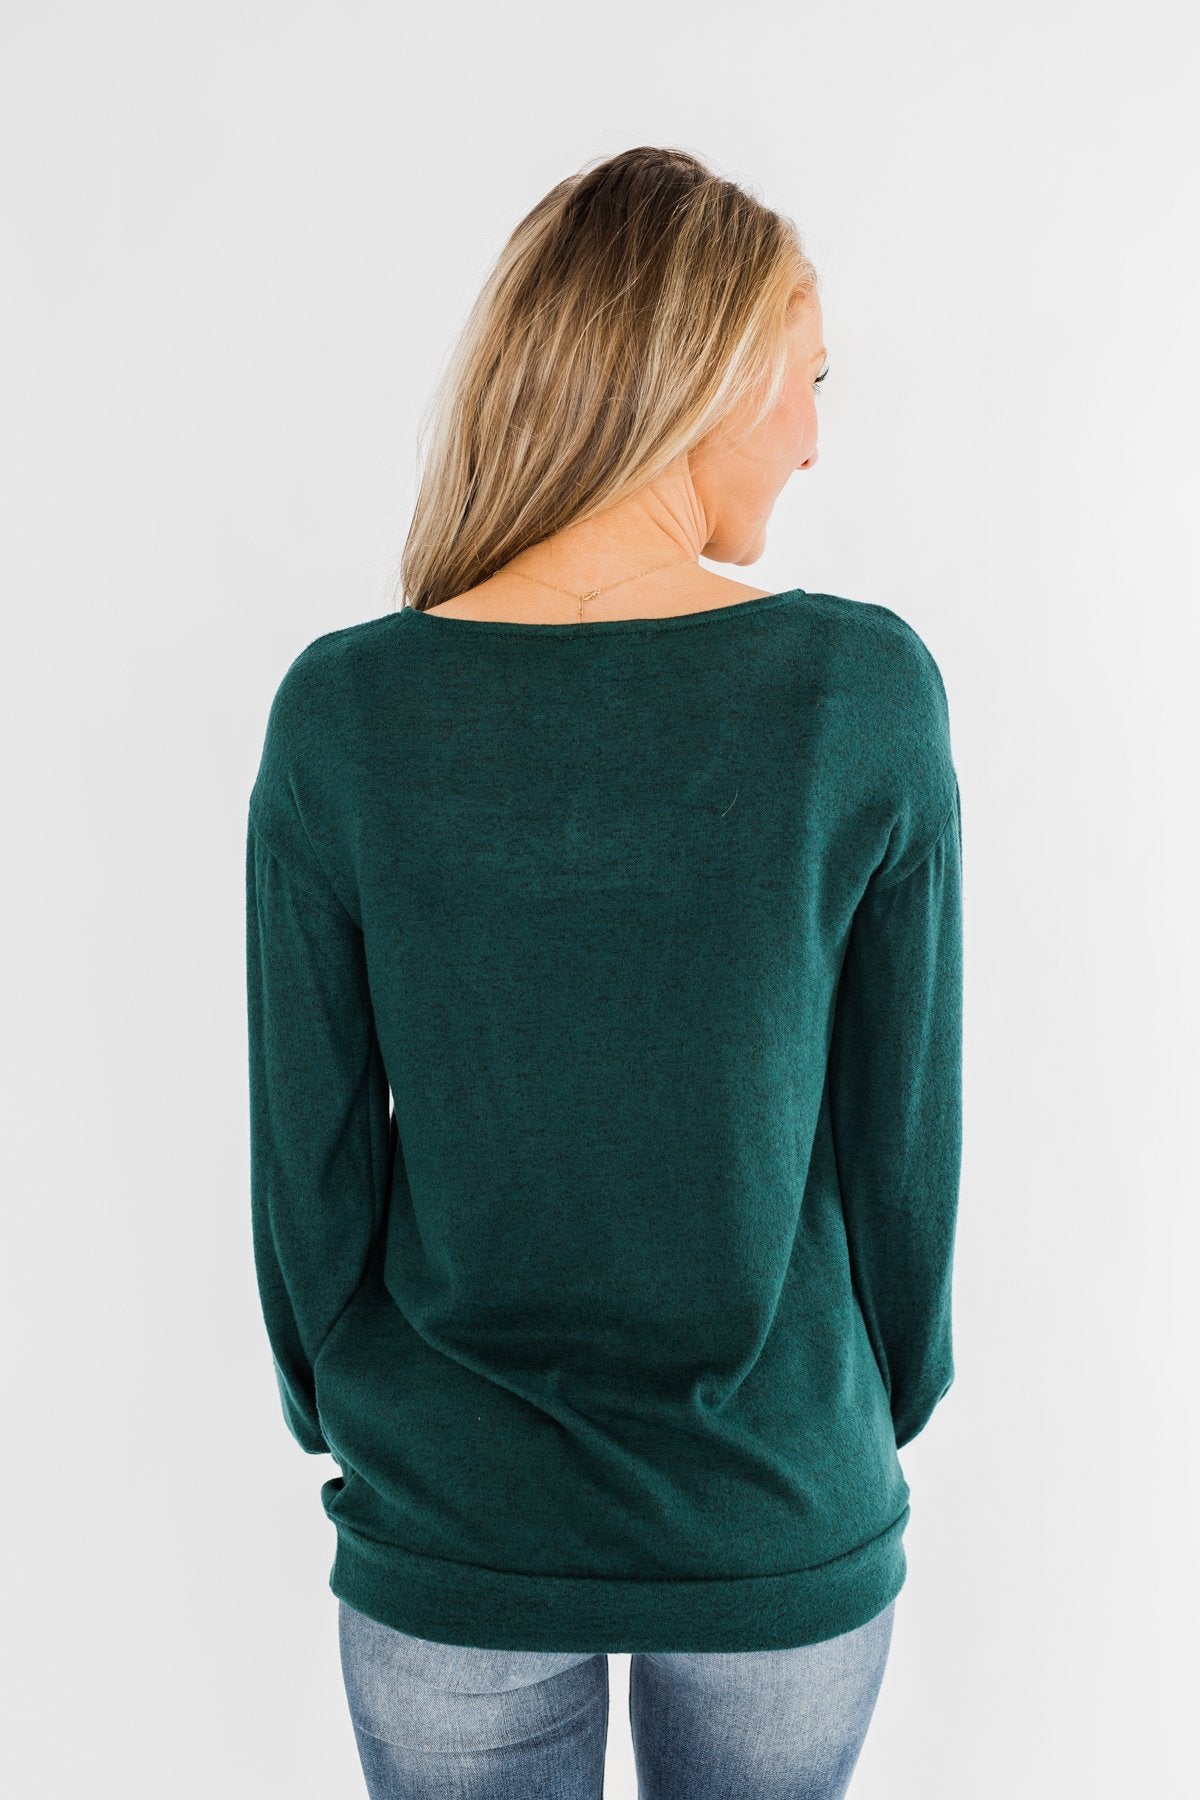 Dance The Day Away Criss Cross Top- Emerald Green – The Pulse Boutique